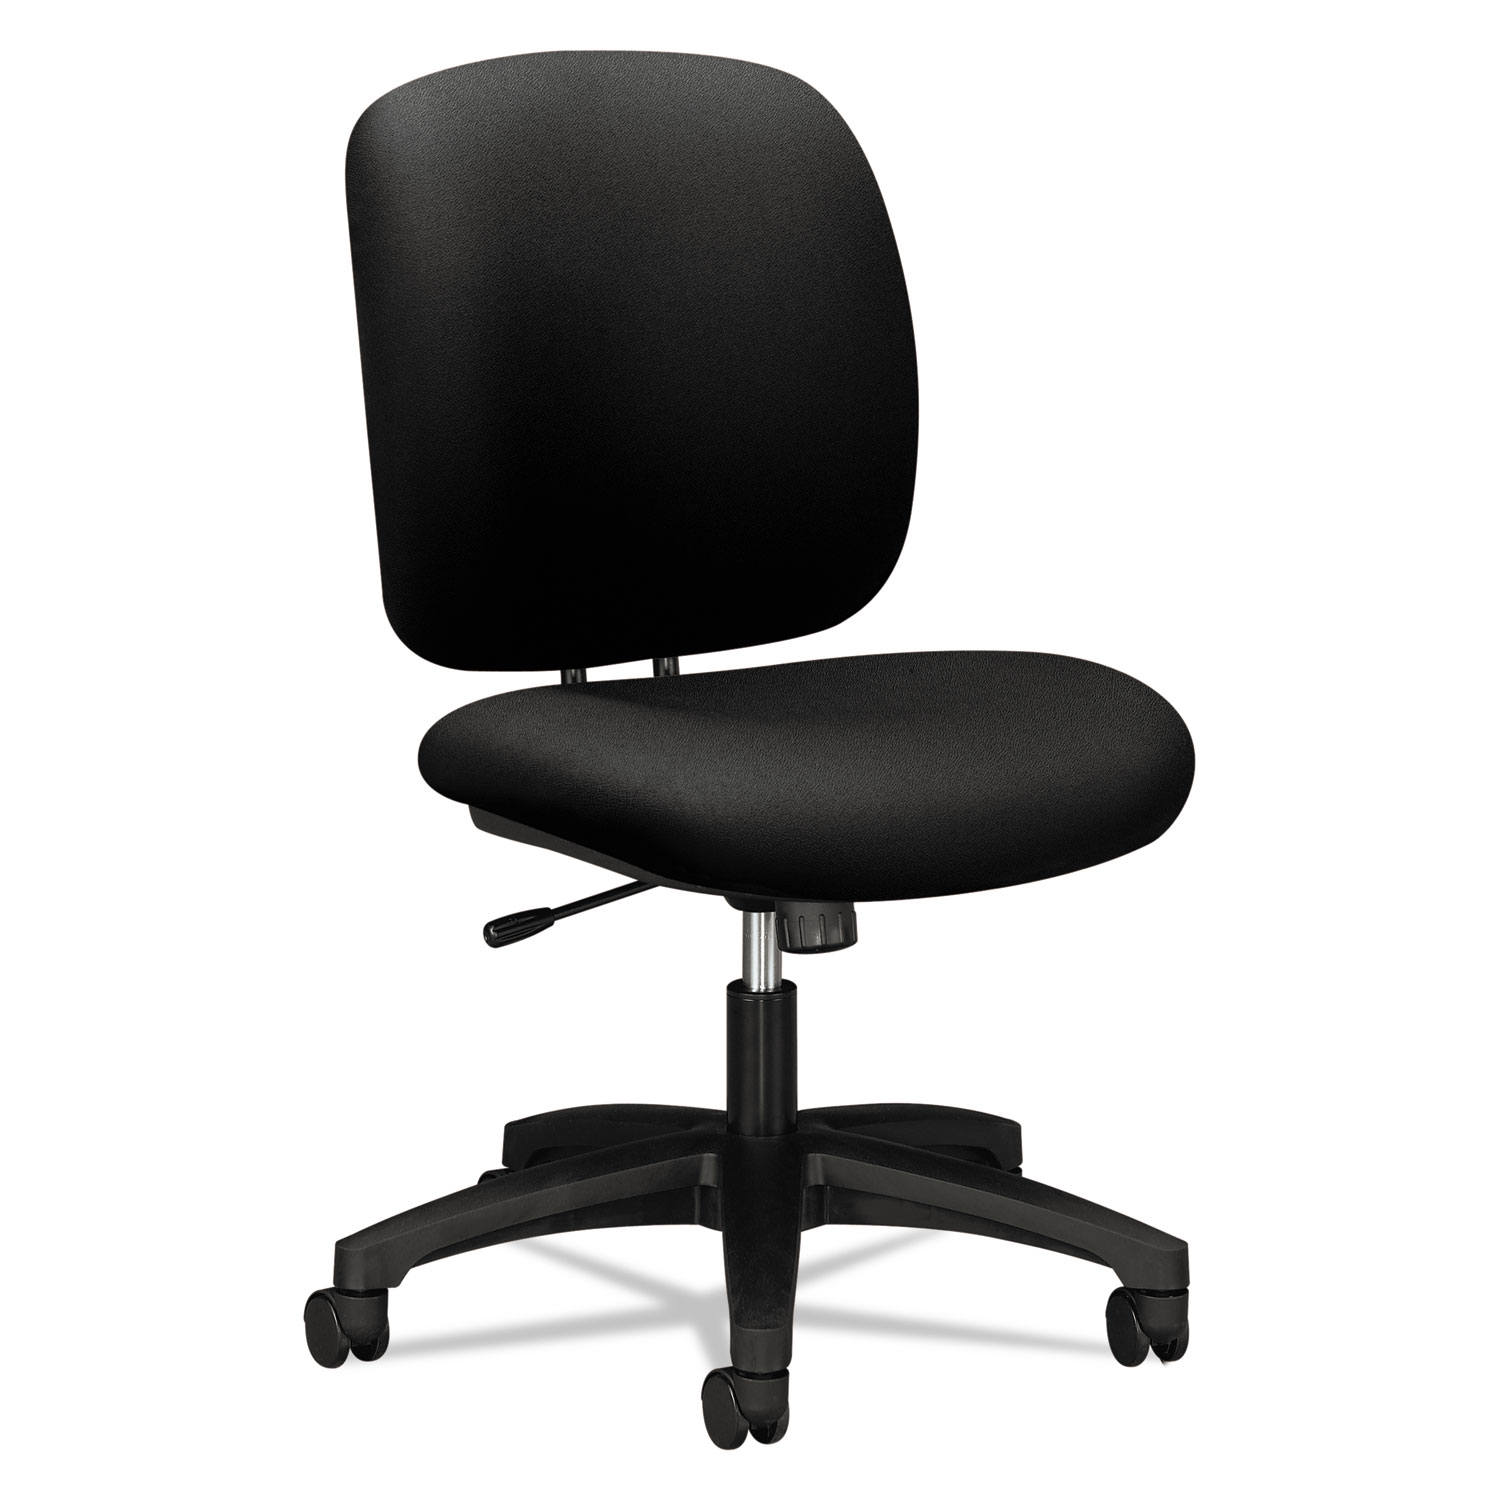  HON H5902.H.CU10.T ComforTask Task Chair, Supports up to 300 lbs, Black Seat, Black Back, Black Base (HON5902CU10T) 